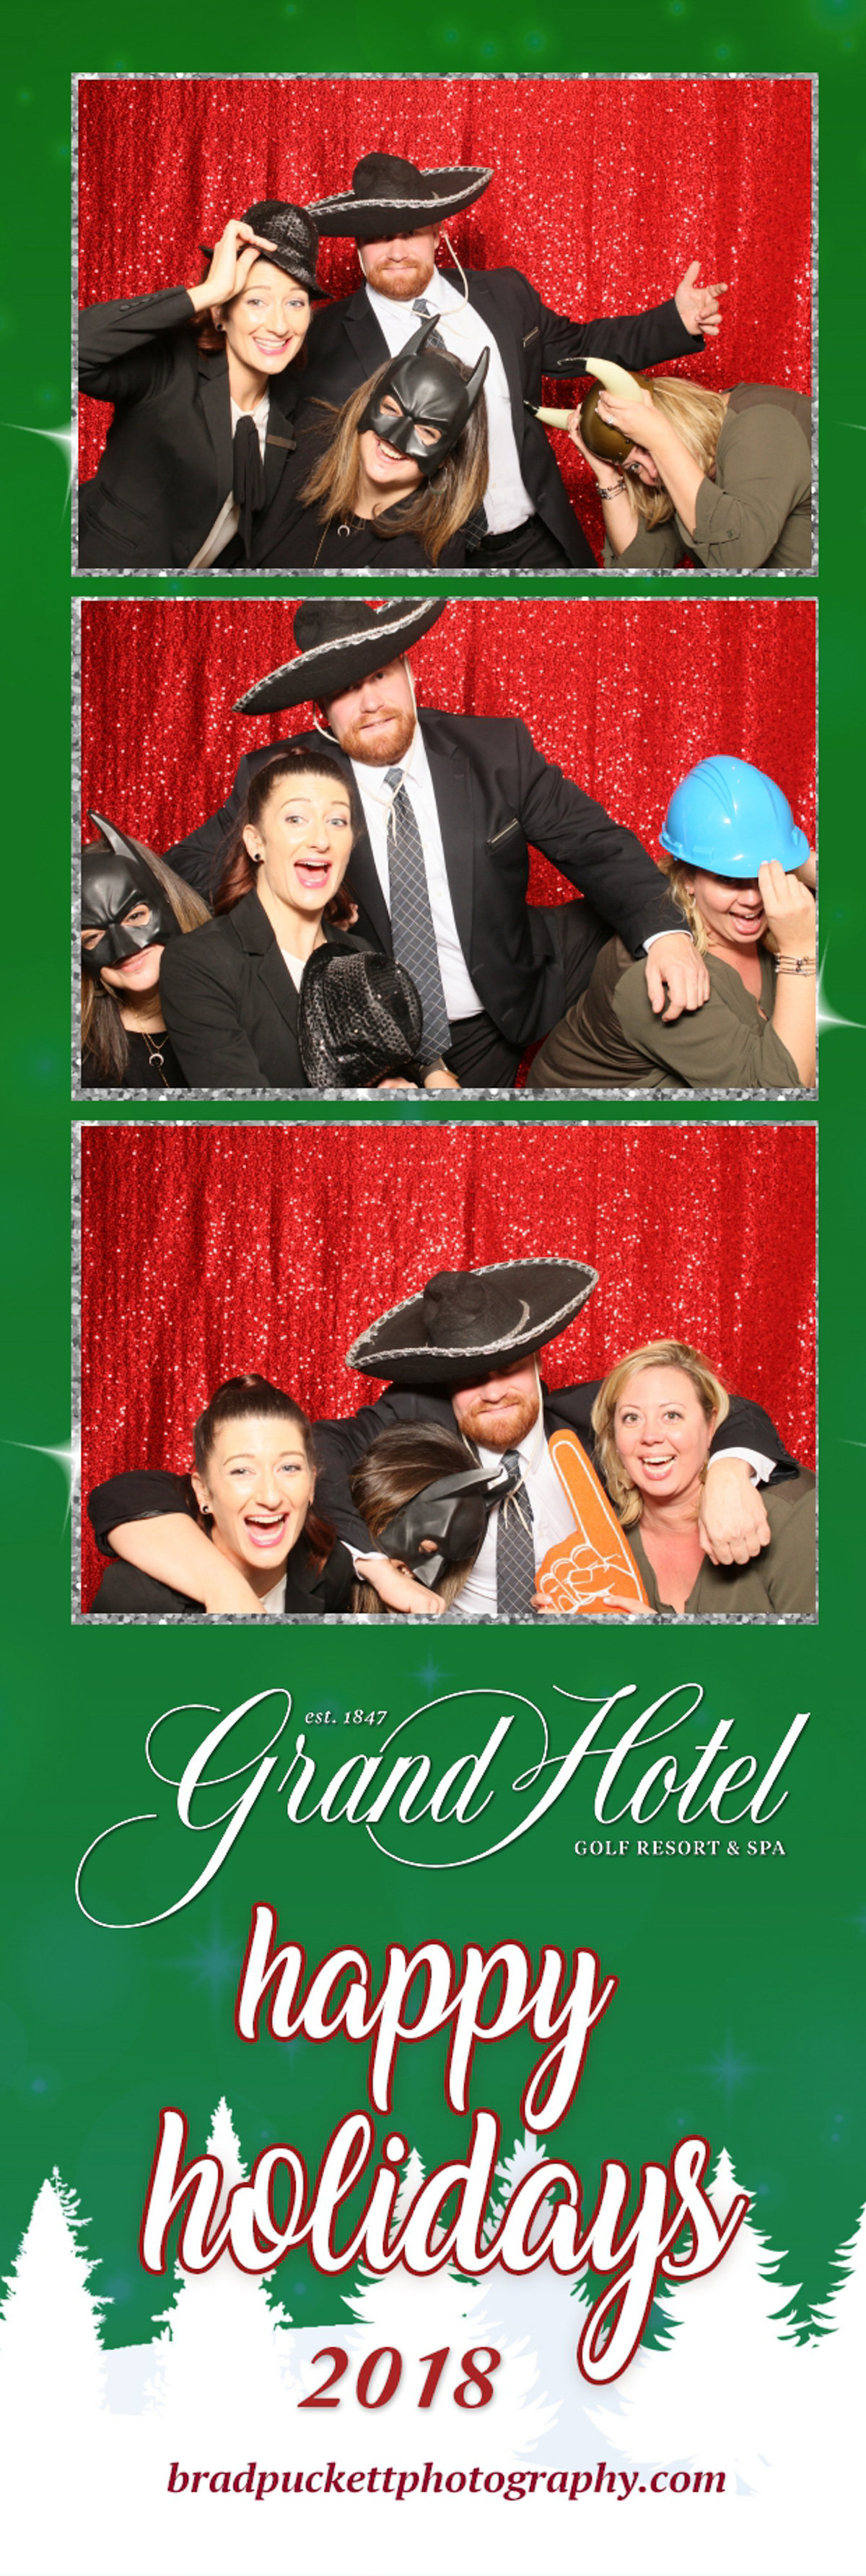 Photo Booth rental for The Grand Hotel employee Christmas Party in Point Clear, Alabama.